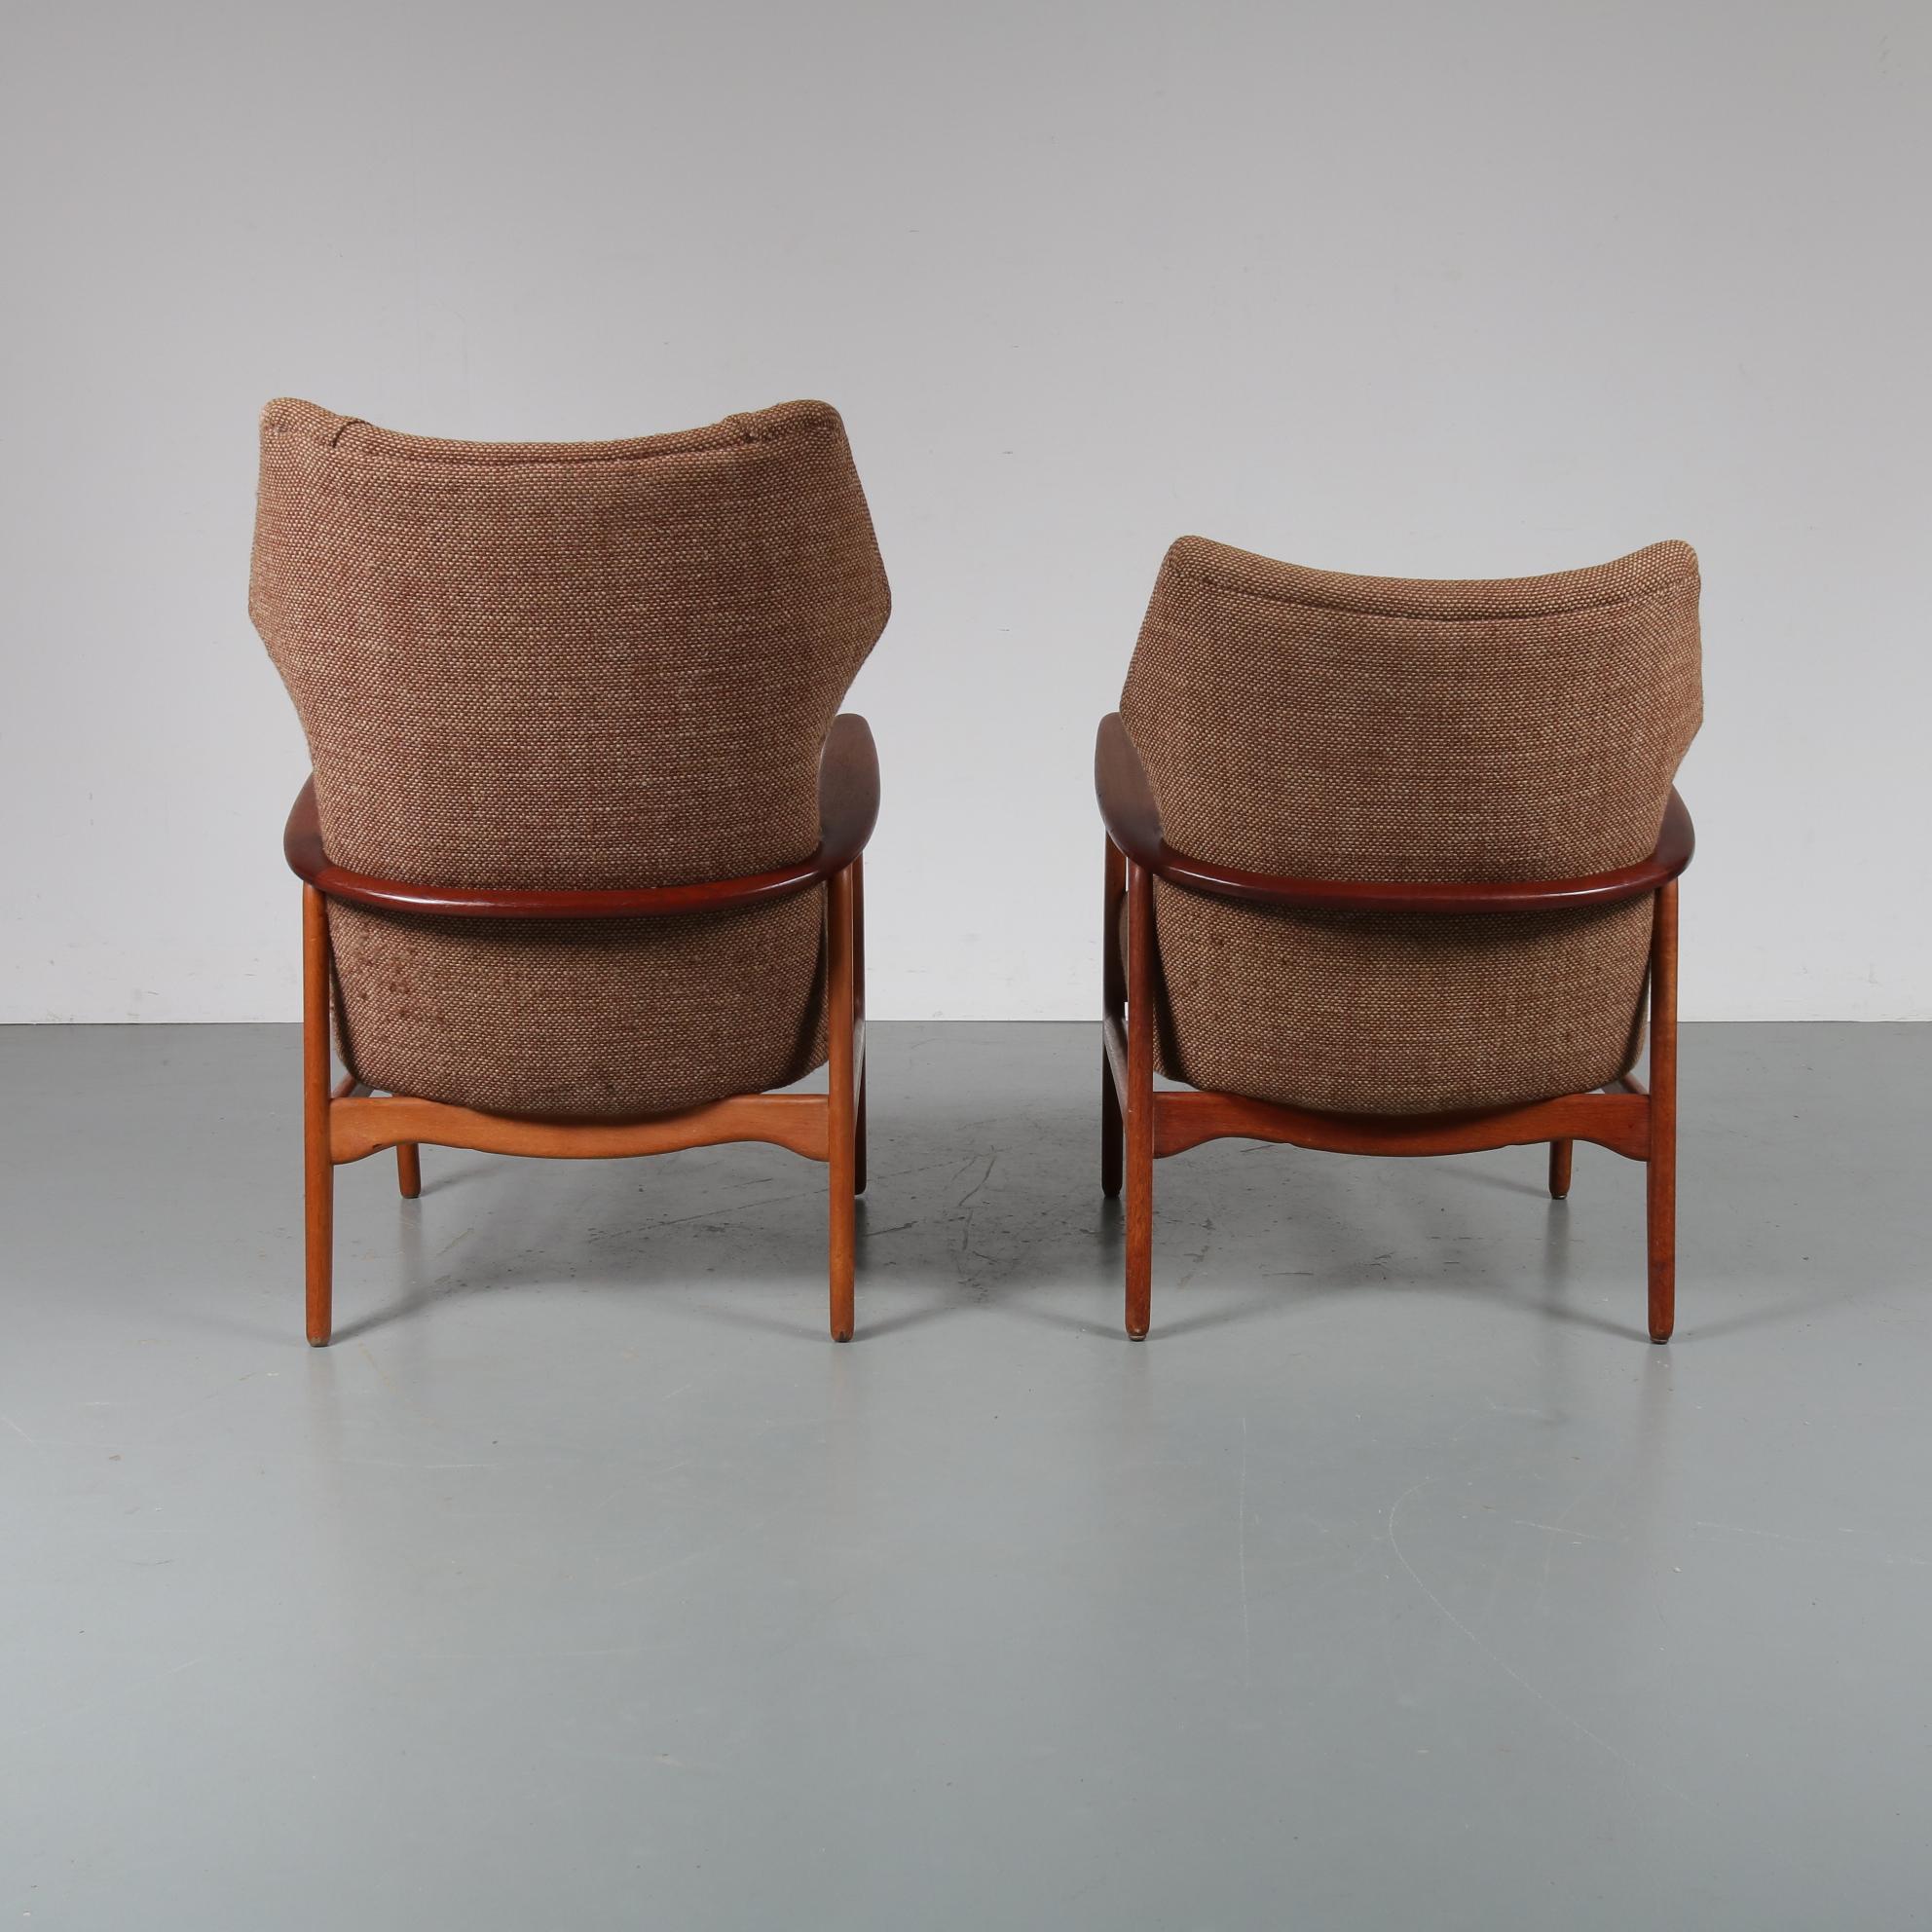 20th Century Set of Two Easy Chairs by Aksel Bender Madsen for Bovenkamp, circa 1950